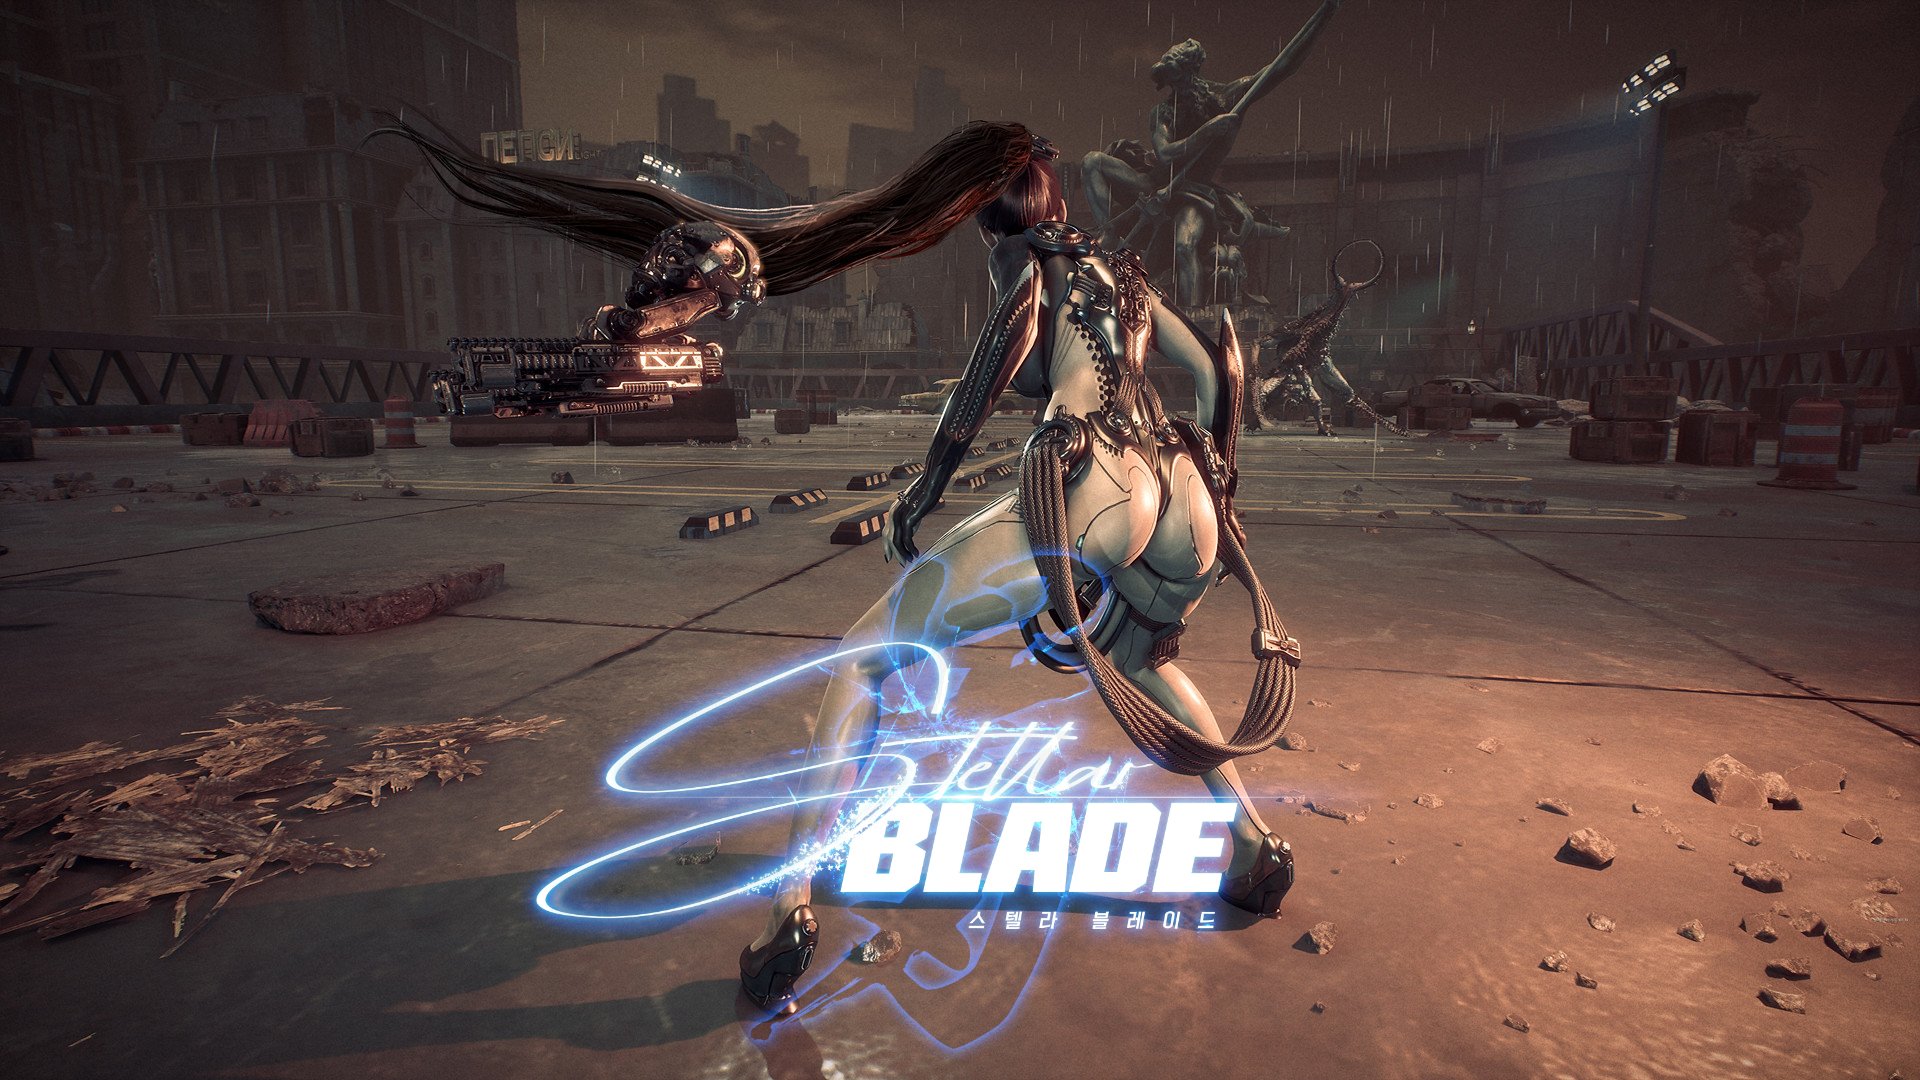 PS5 Exclusive Project EVE Officially Called 'Stellar Blade'